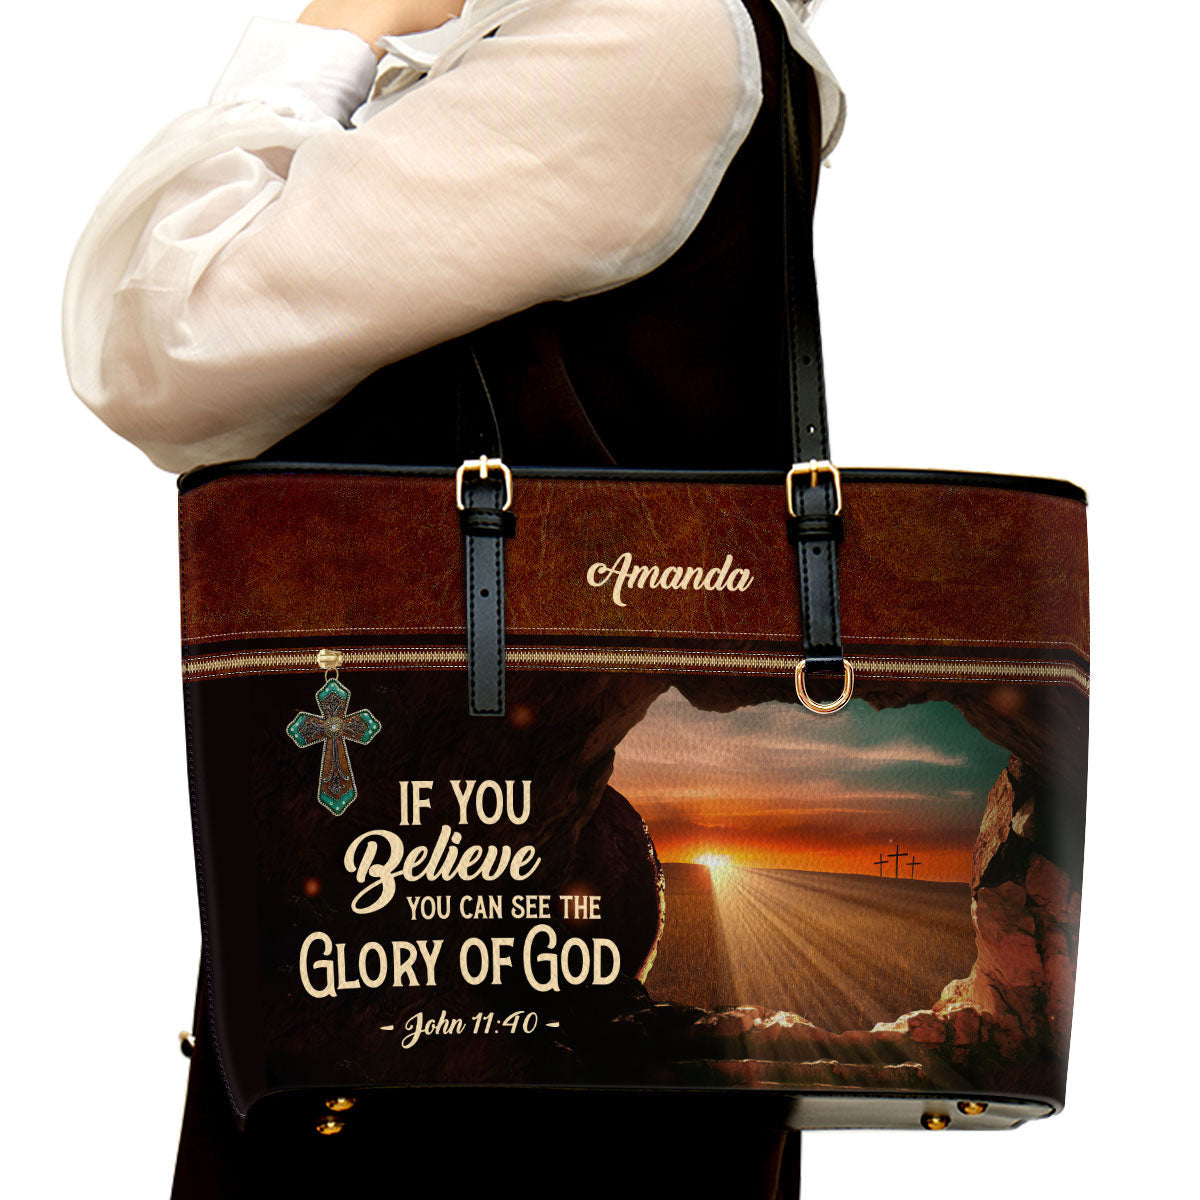 If You Believe You Can See The Glory Of God Personalized Large Leather Tote Bag - Christian Inspirational Gifts For Women